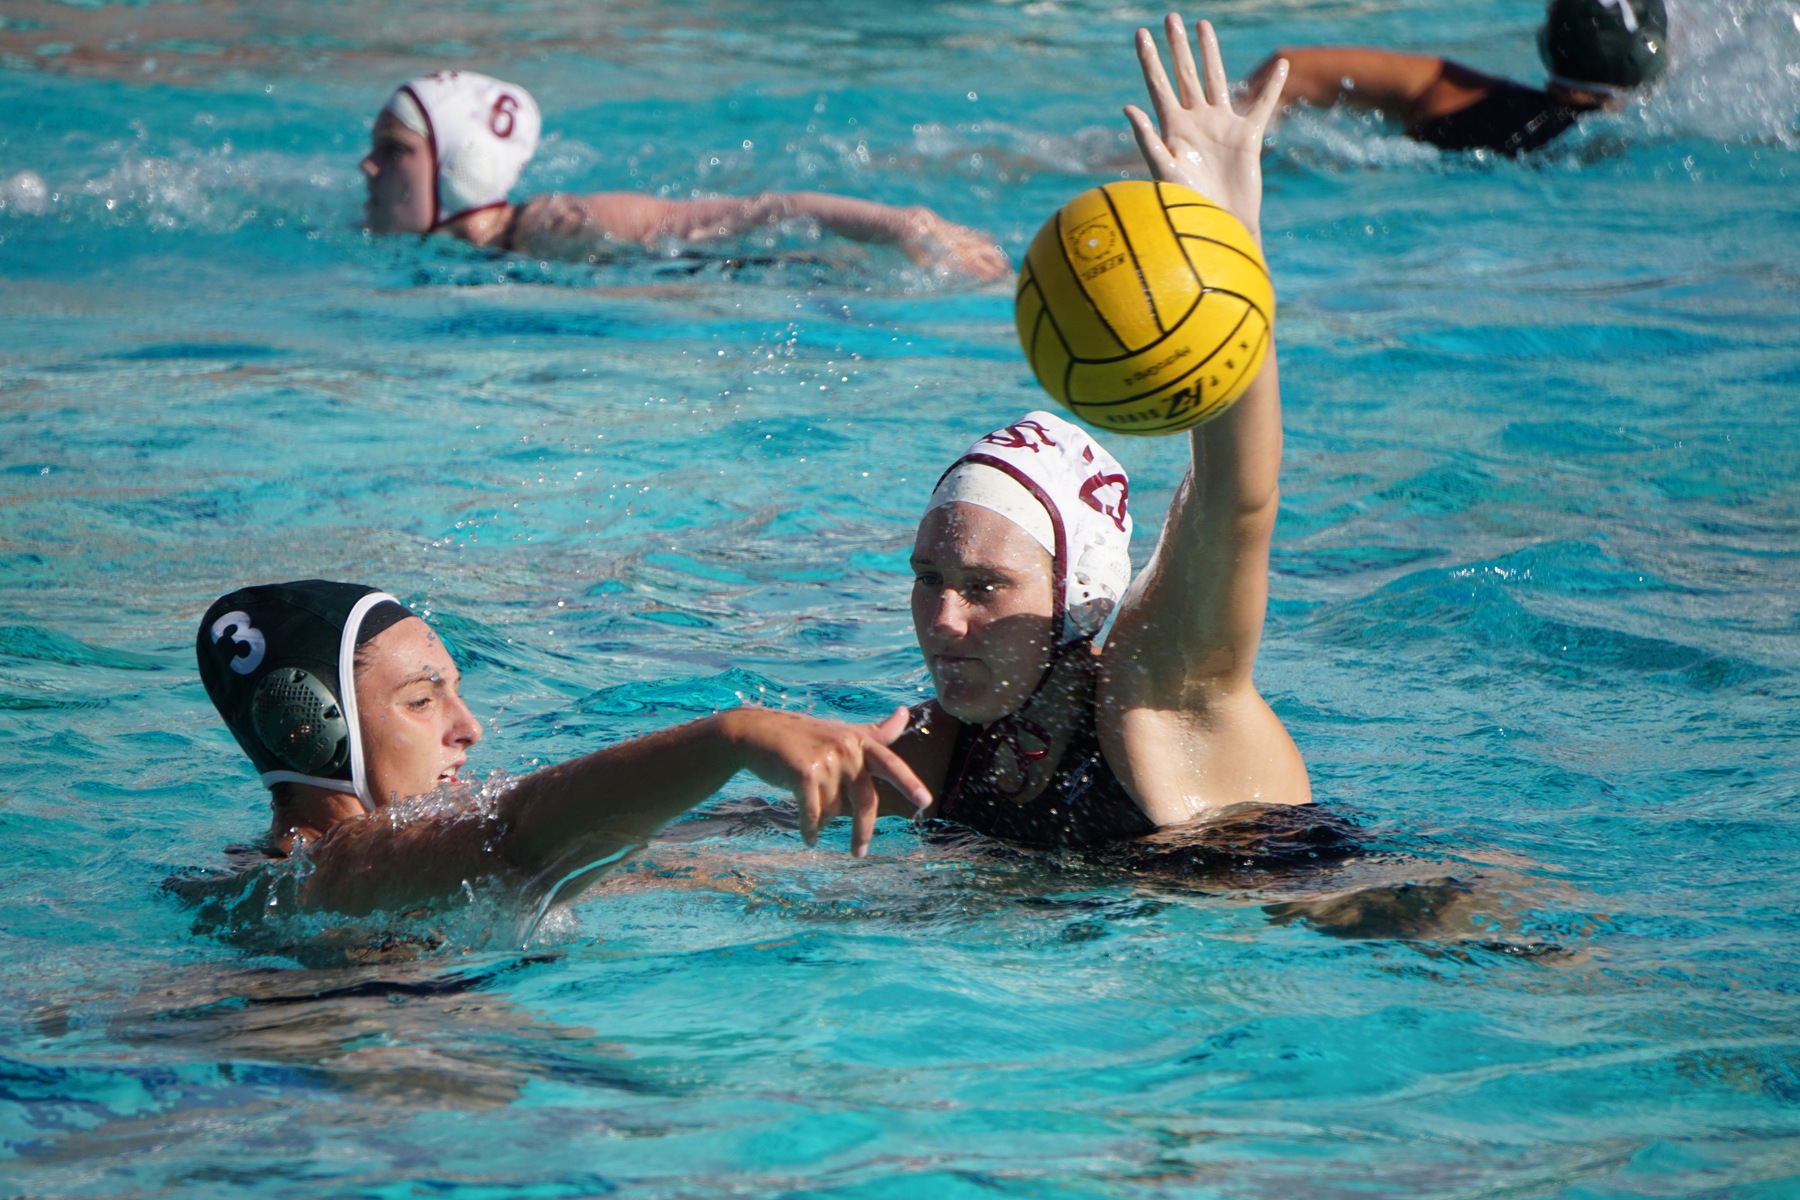 Women's Water Polo being season at Cuesta College